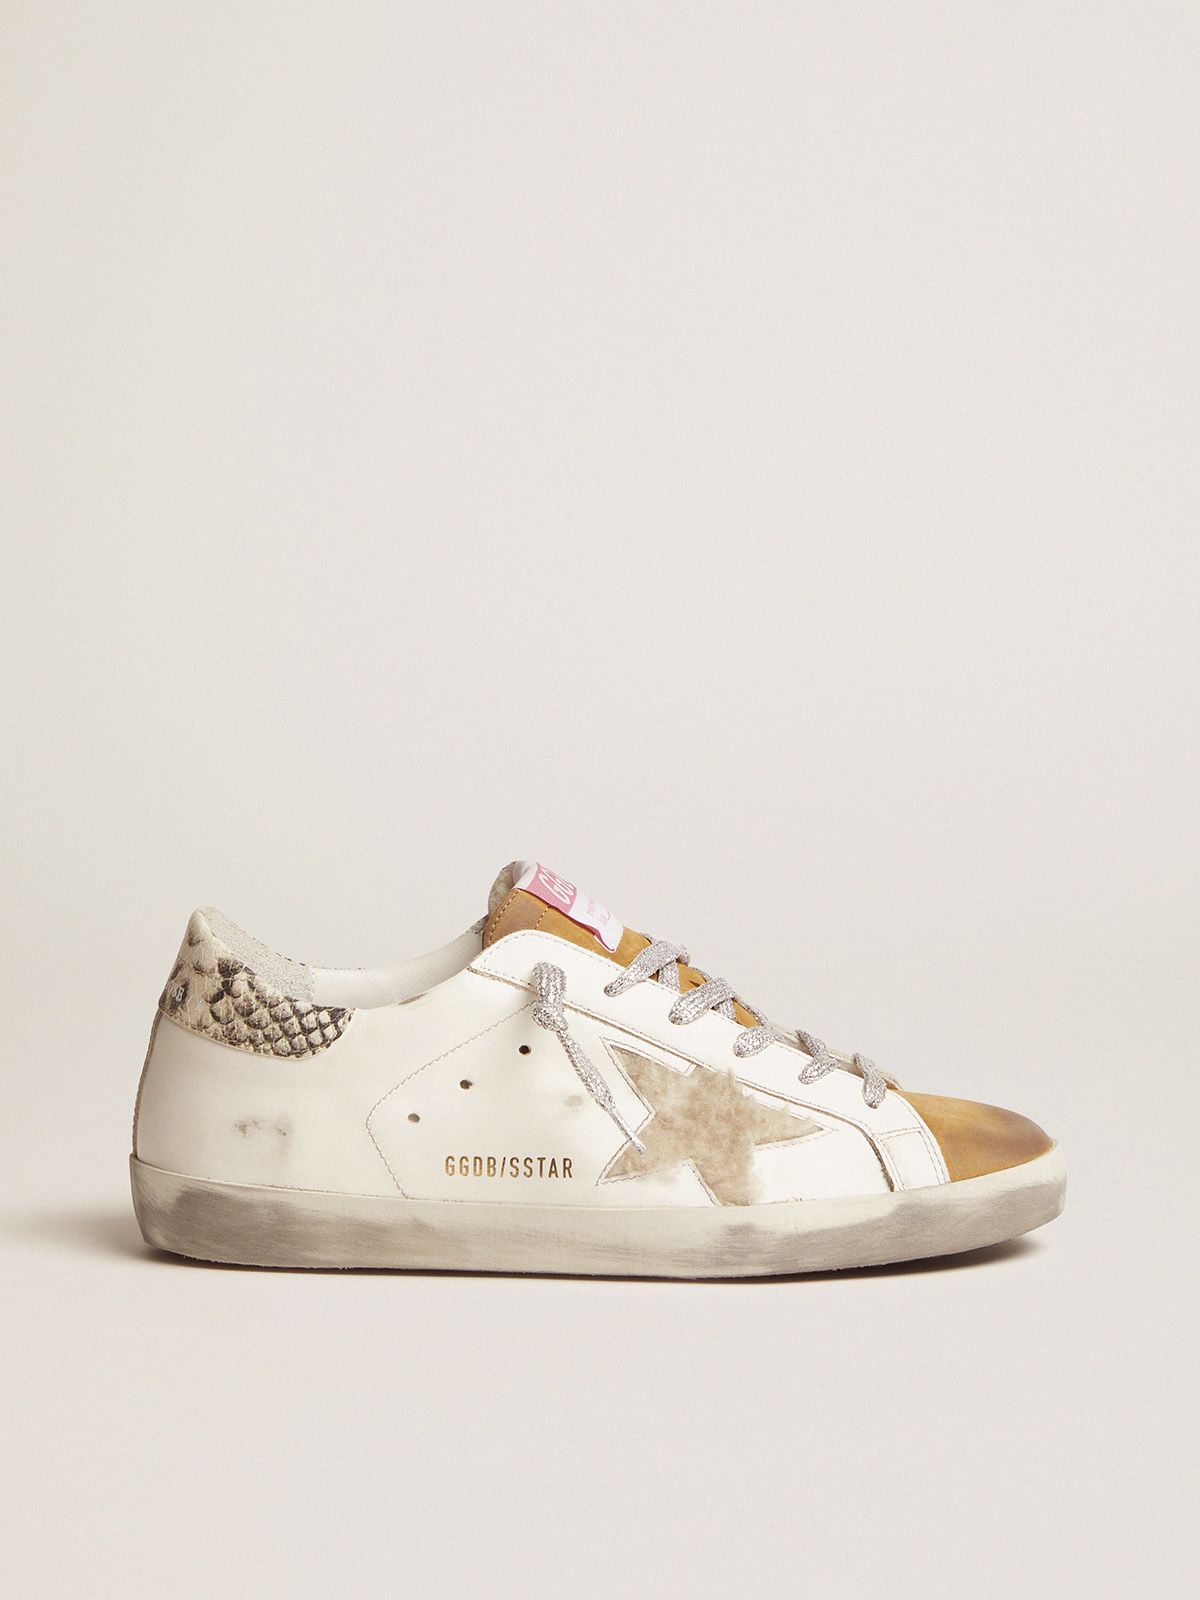 golden goose heel snake-print tab with from sneakers Super-Star made shearling